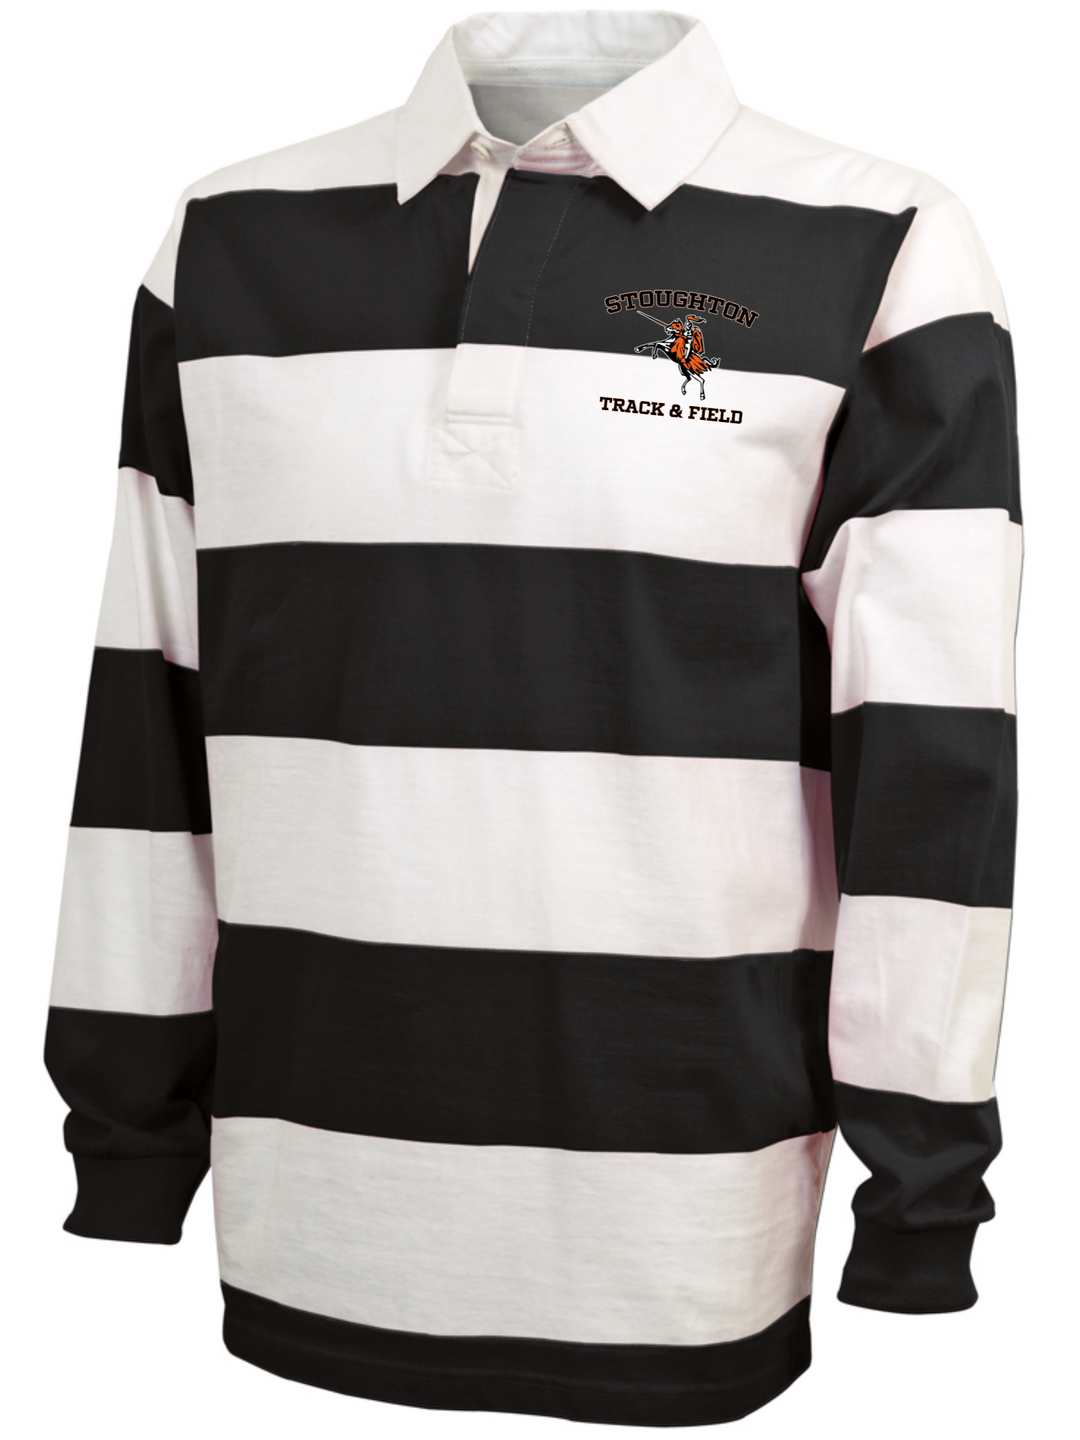 Stoughton Track & Field - Classic Rugby Shirt (9278)